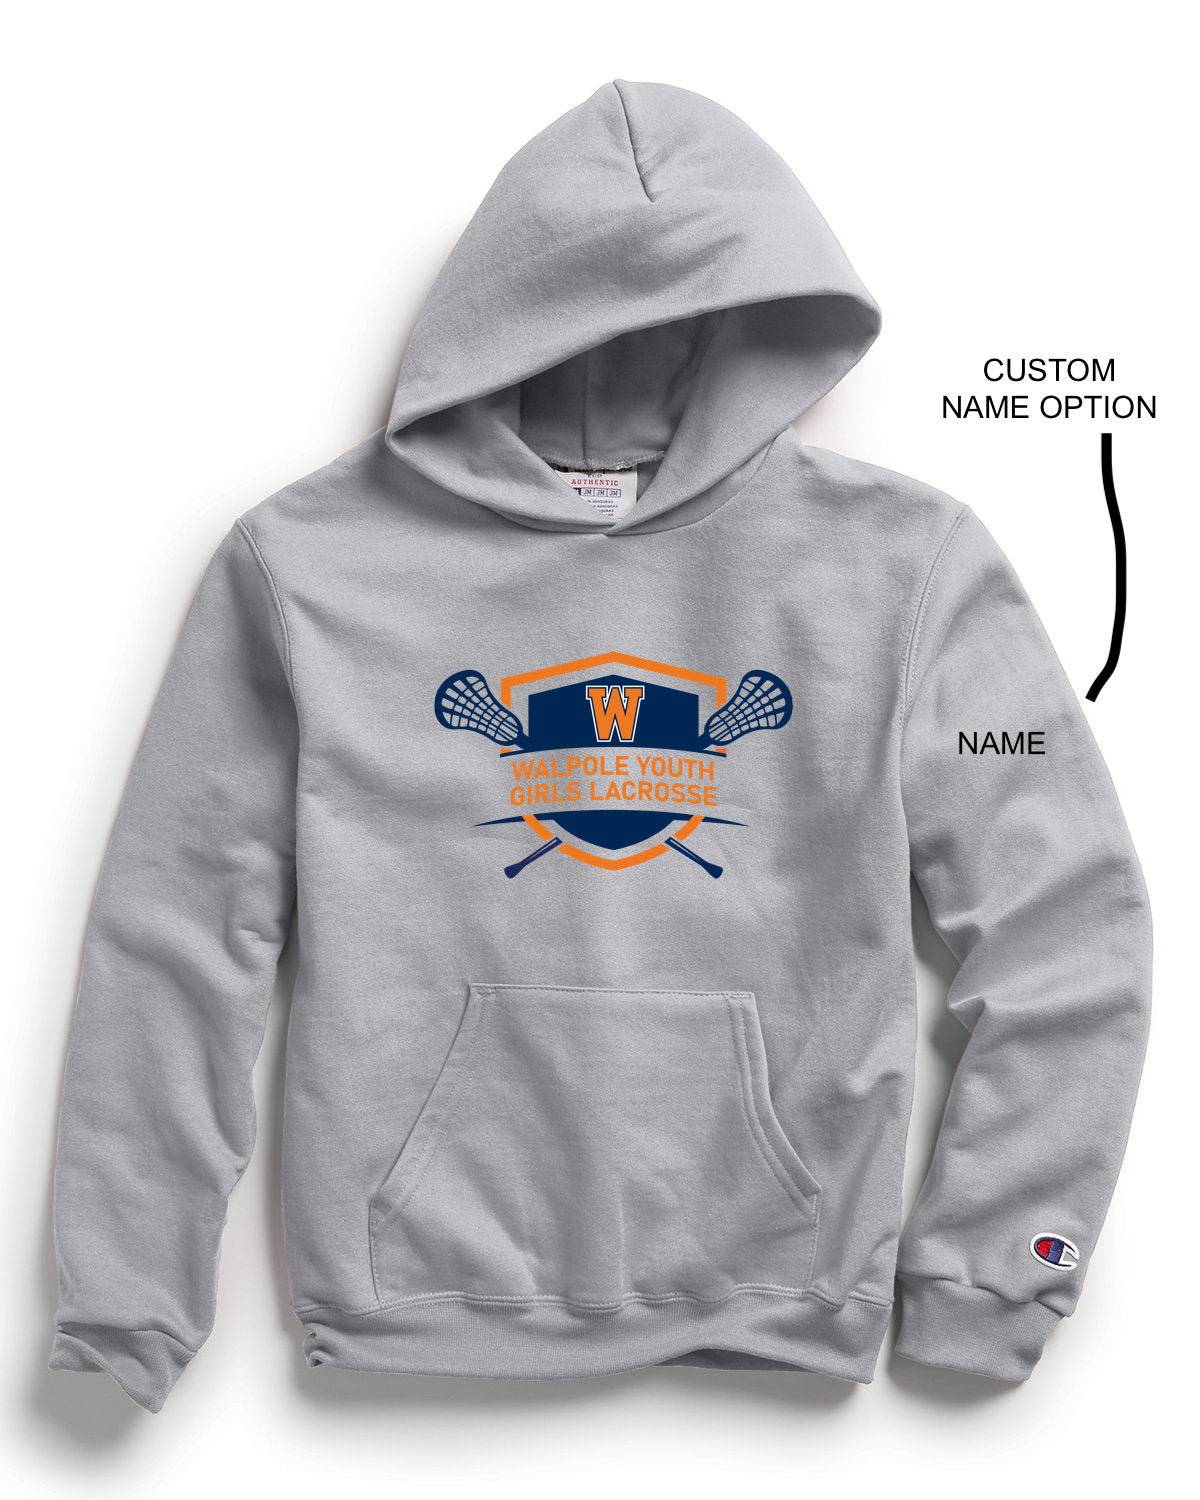 Walpole Youth Girls Lacrosse - Champion Youth Powerblend® Pullover Hooded Sweatshirt (S790)